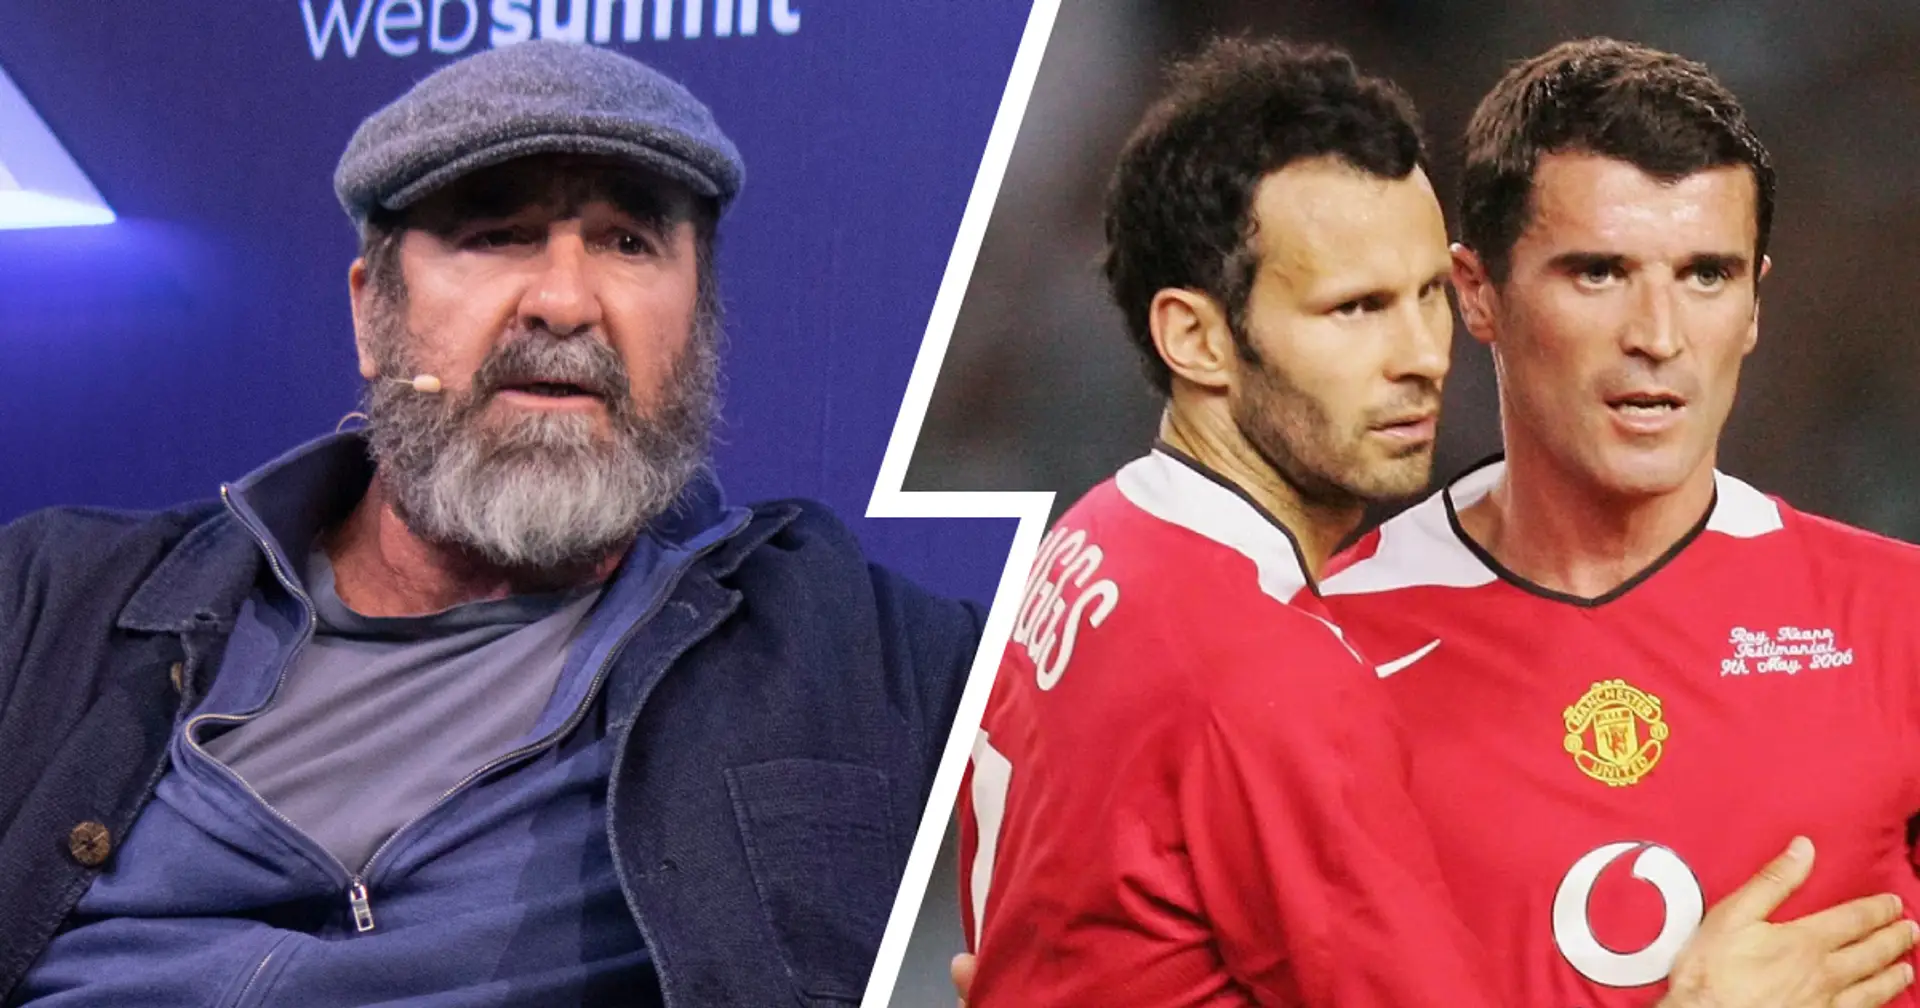 Cantona names two football icons he 'admires' - one of them is Man United legend